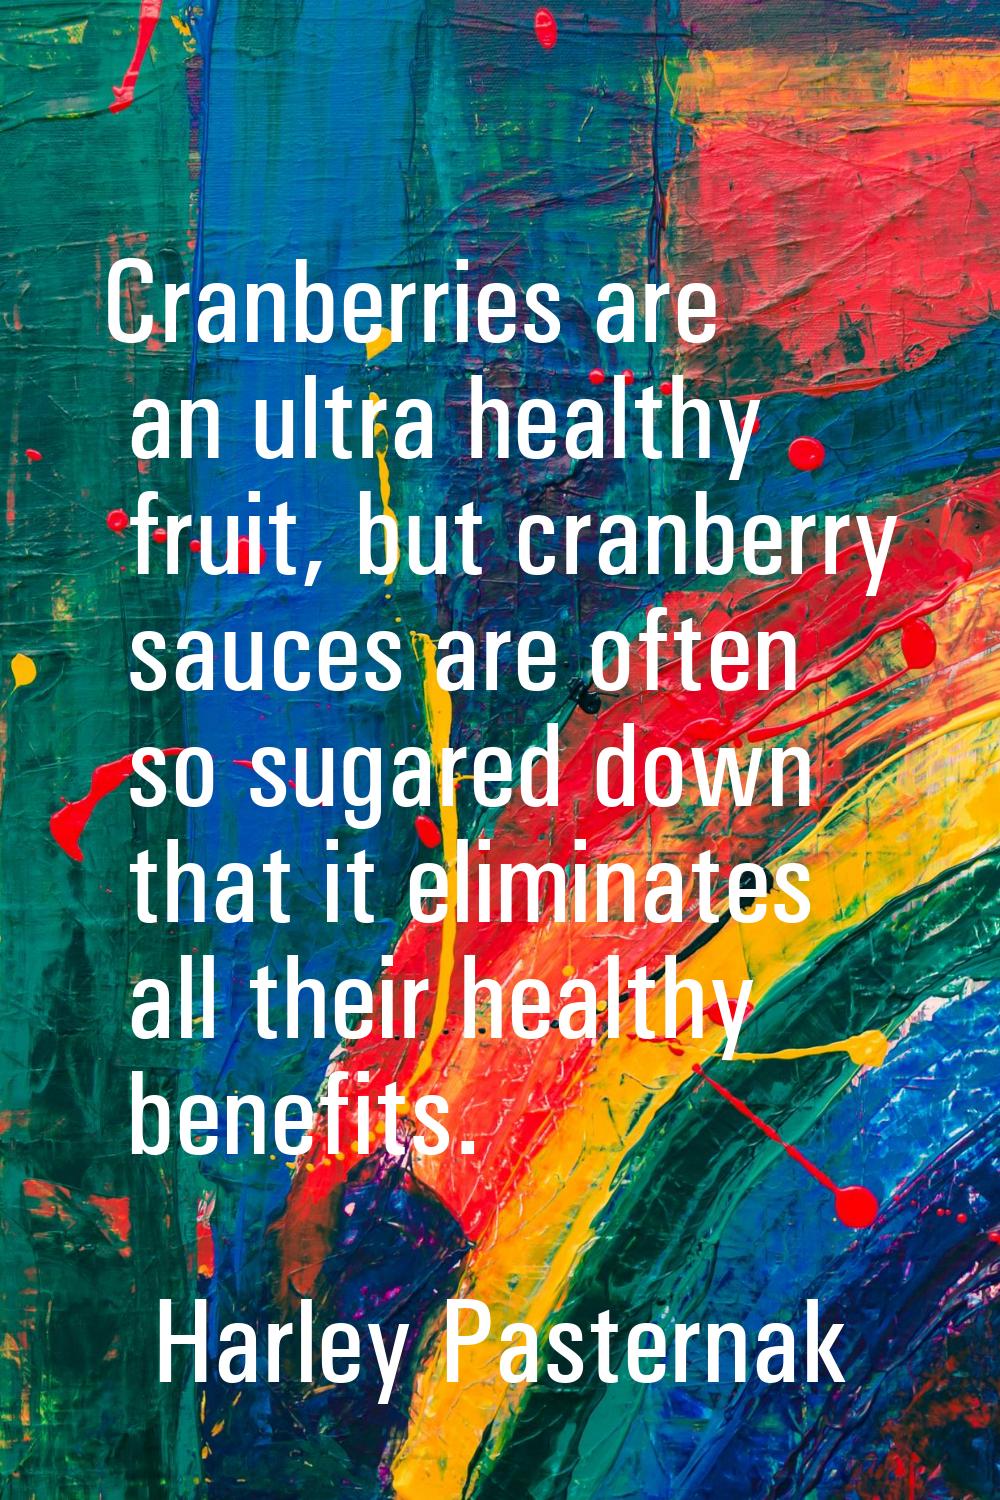 Cranberries are an ultra healthy fruit, but cranberry sauces are often so sugared down that it elim